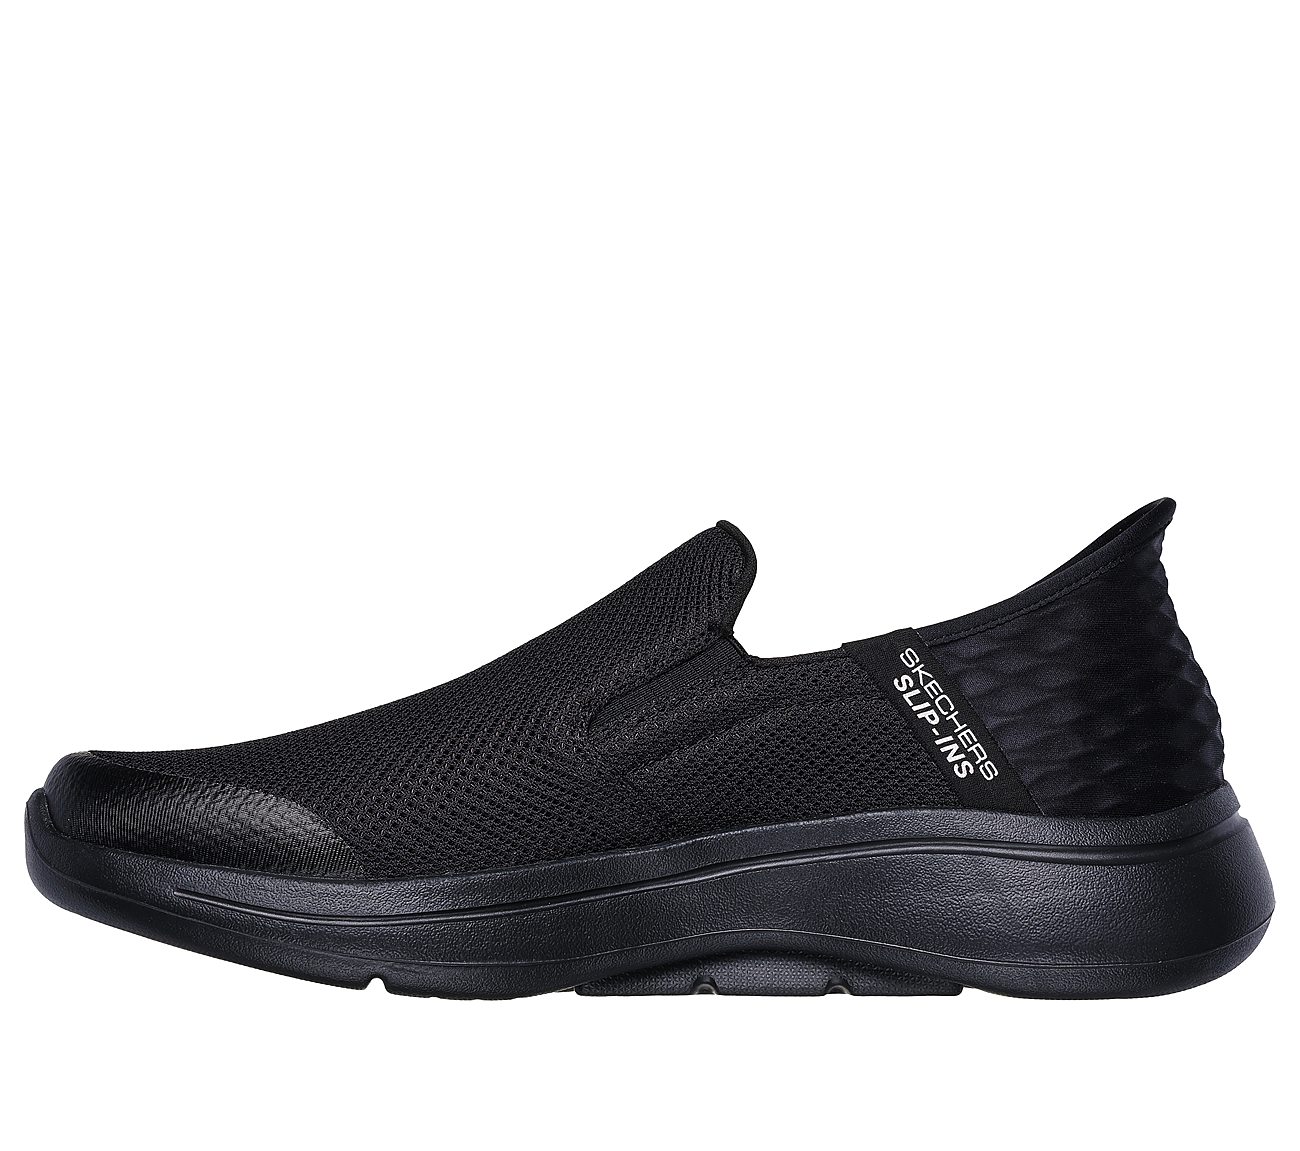 GO WALK ARCH FIT - HANDS FREE, BBLACK Footwear Left View